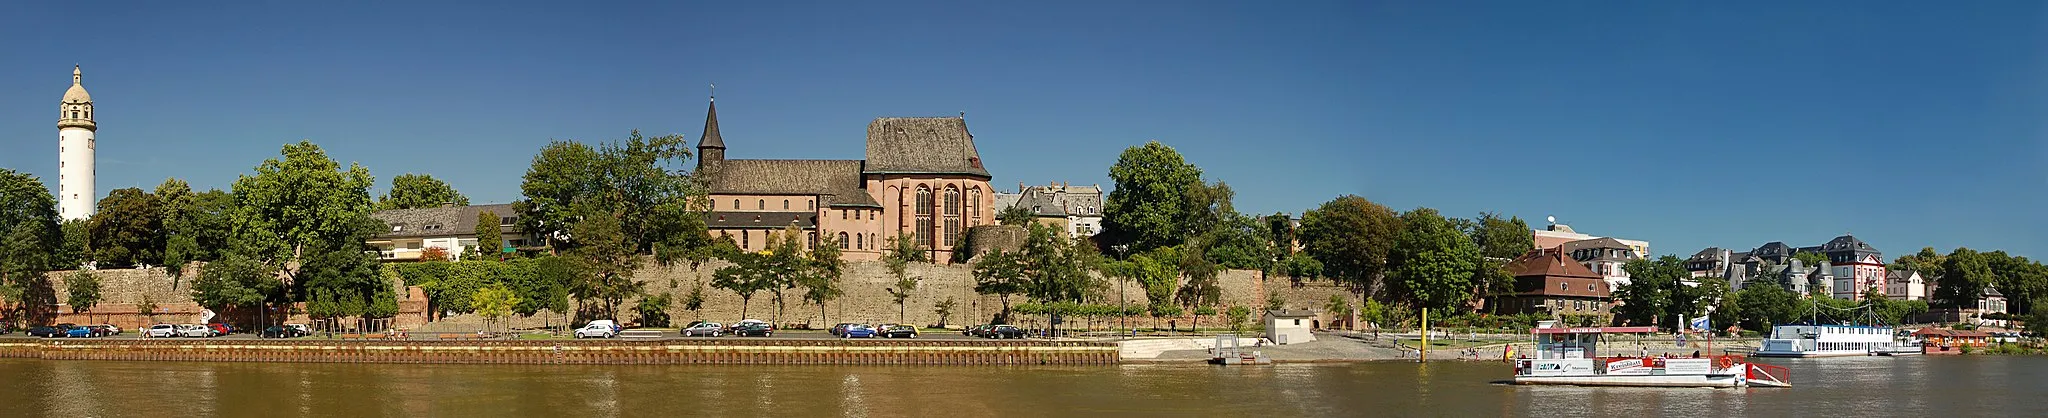 Photo showing: Panoramic of the Main river bank and the old town wall in Frankfurt-Höchst Donjon of the castle, town wall with Main River gate, Saint Justinus' church, Main River mill, hotelship "Peter Schlott", Nidda River estuary, former Bolongaro's cigar manufactory, Bolongaro Palace